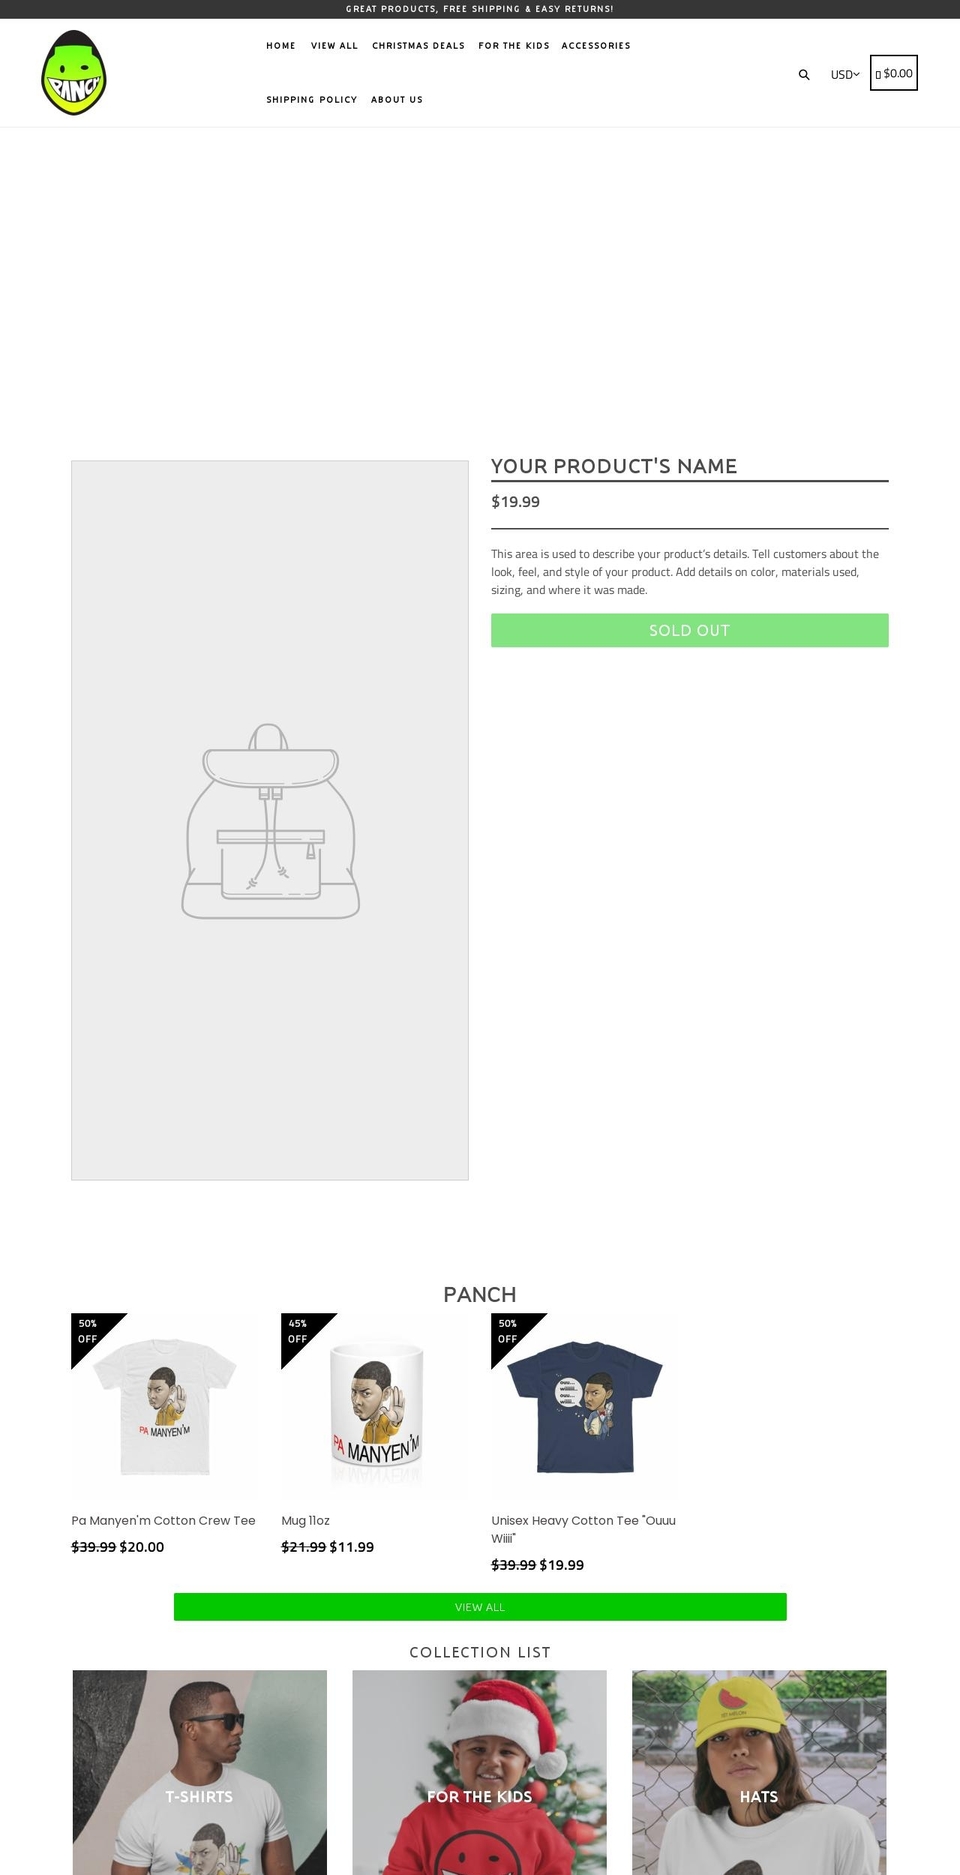 Theme export Shopify theme site example panchcollections.com